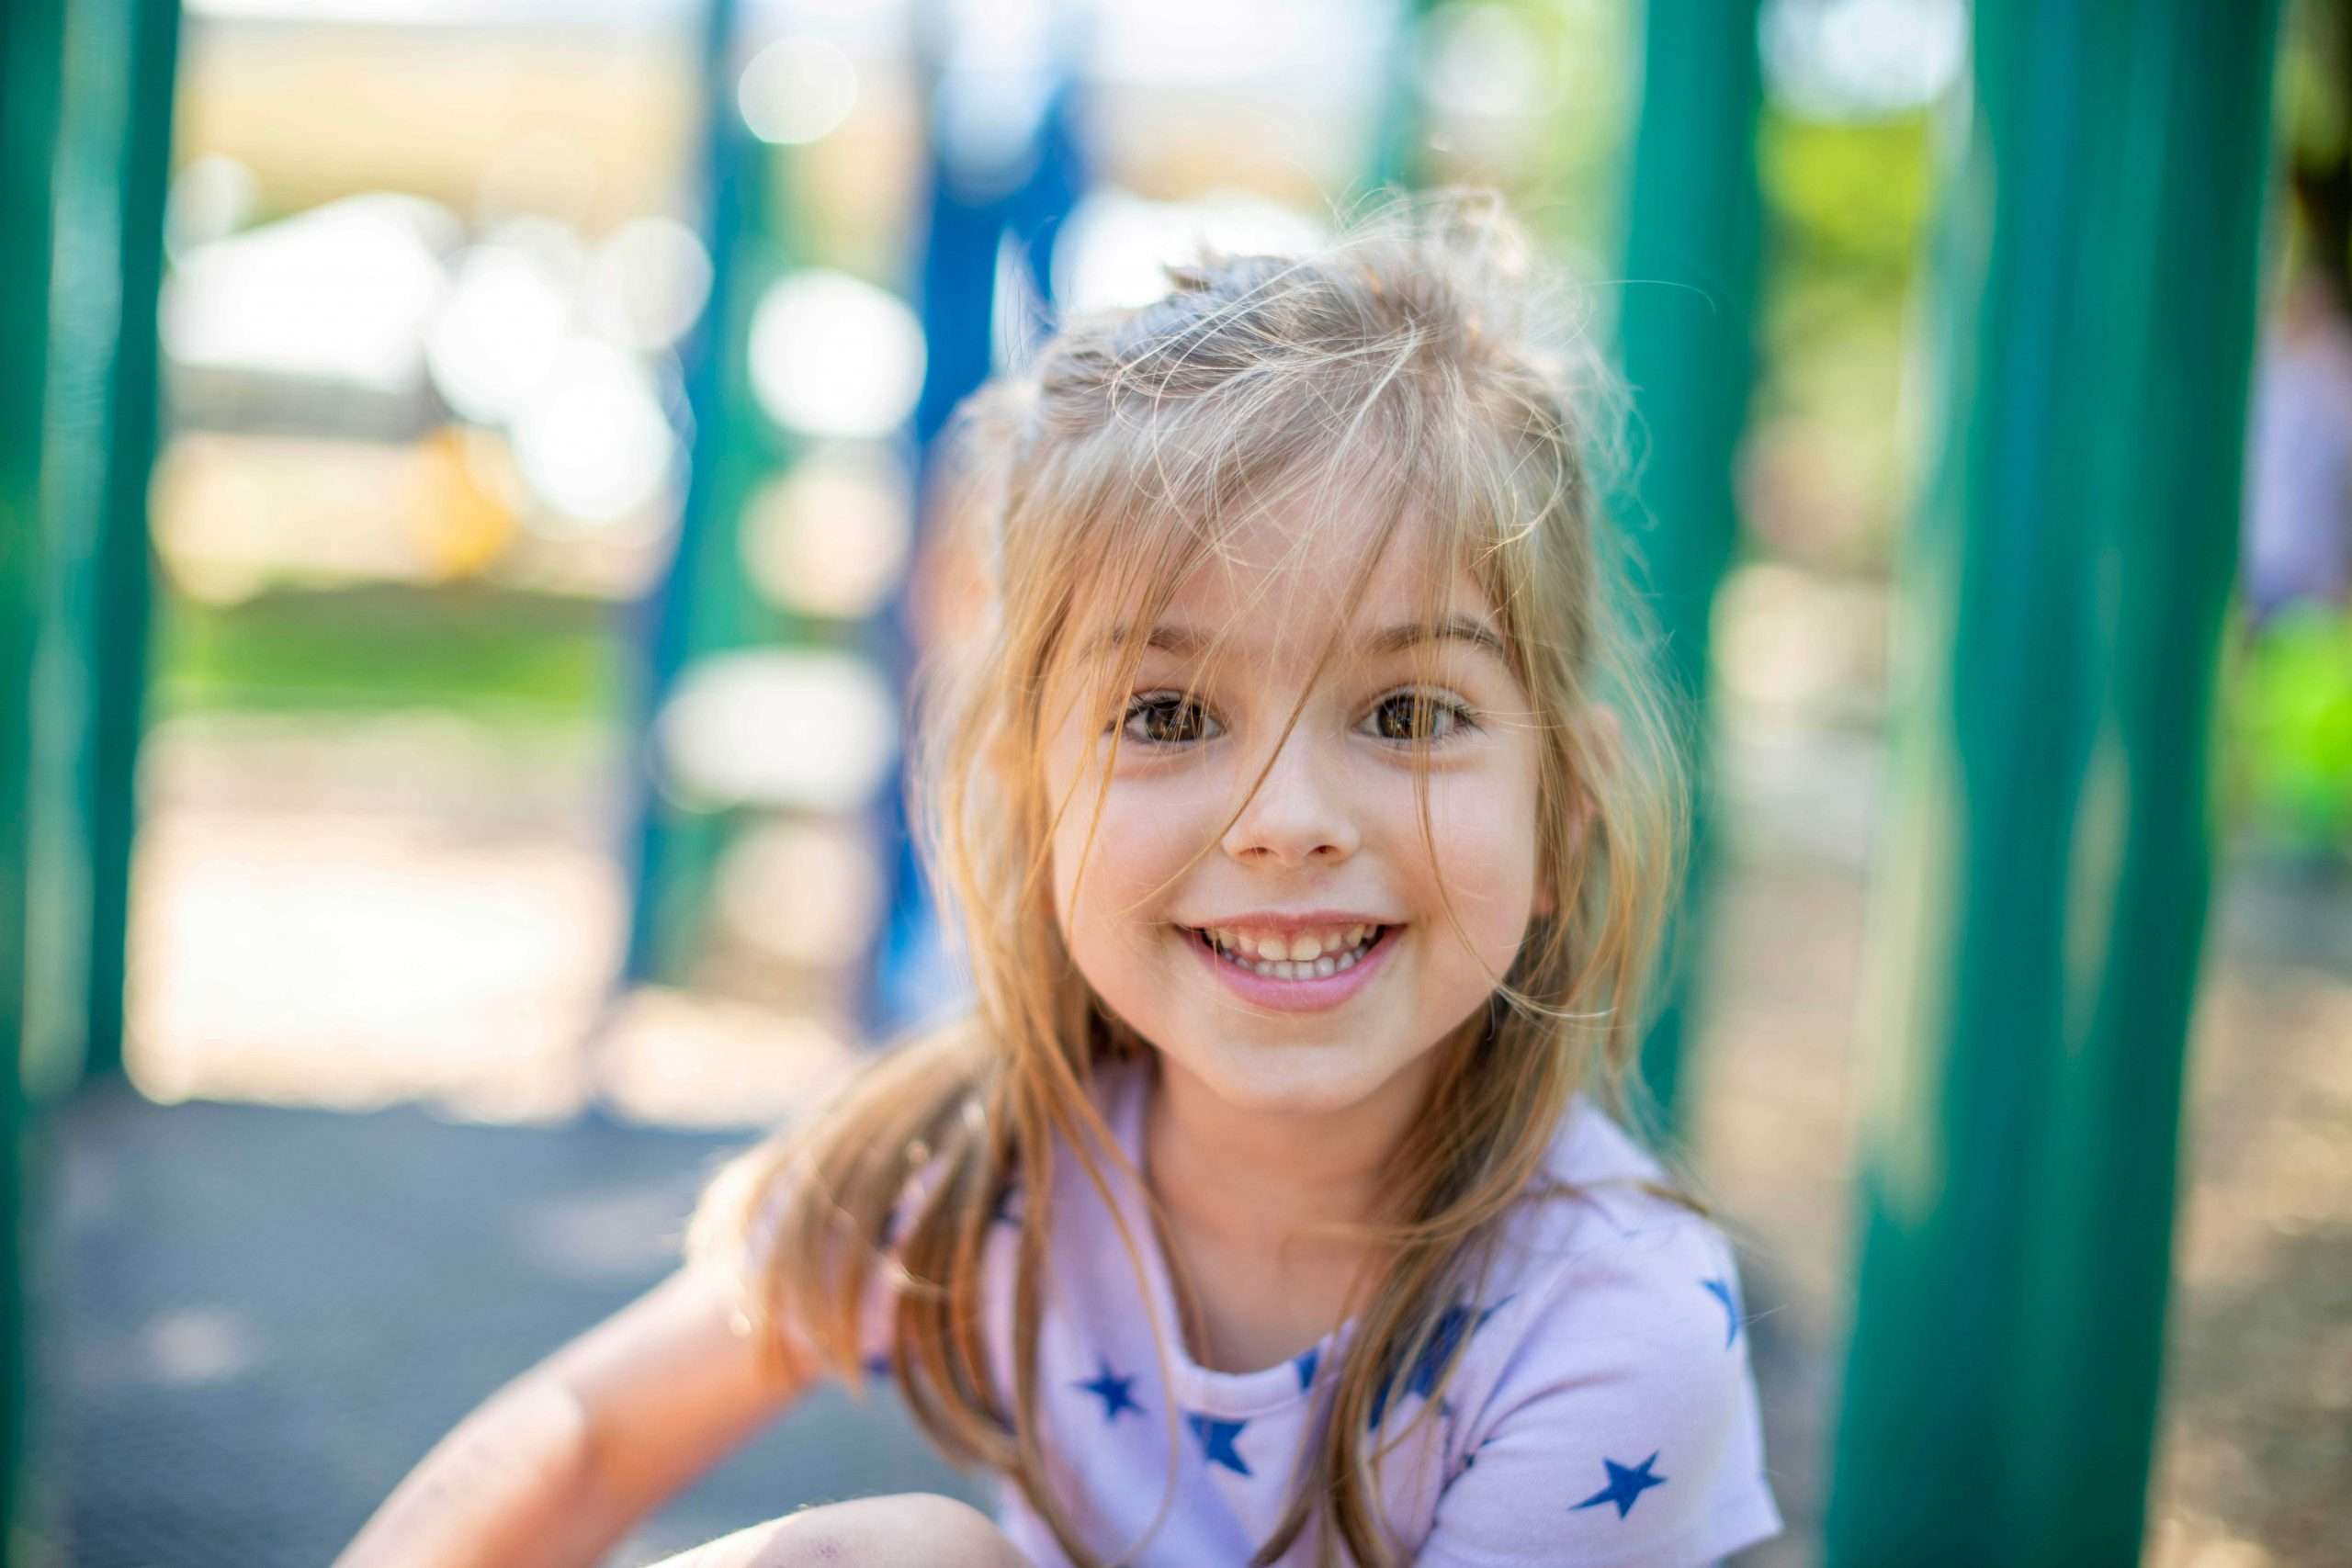 Girl with bangs looking directly at the camera and smiling. She is sitting on playground equipment at JCYS Northwest Family Center.